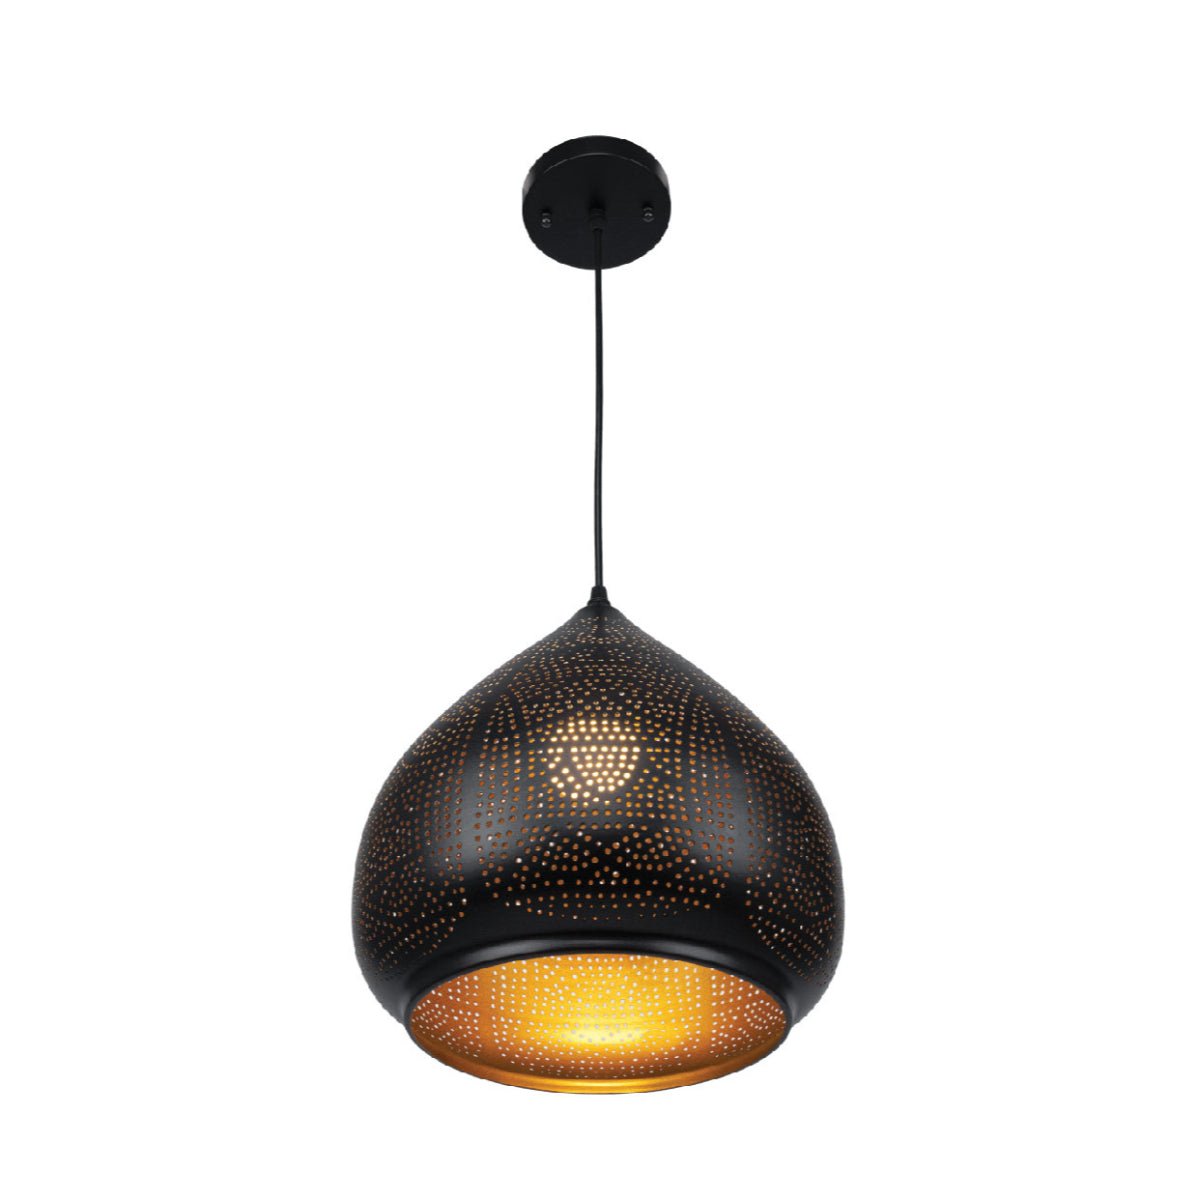 Main image of Black-Golden Metal India Dome Pendant Ceiling Light with E27 | TEKLED 150-17958